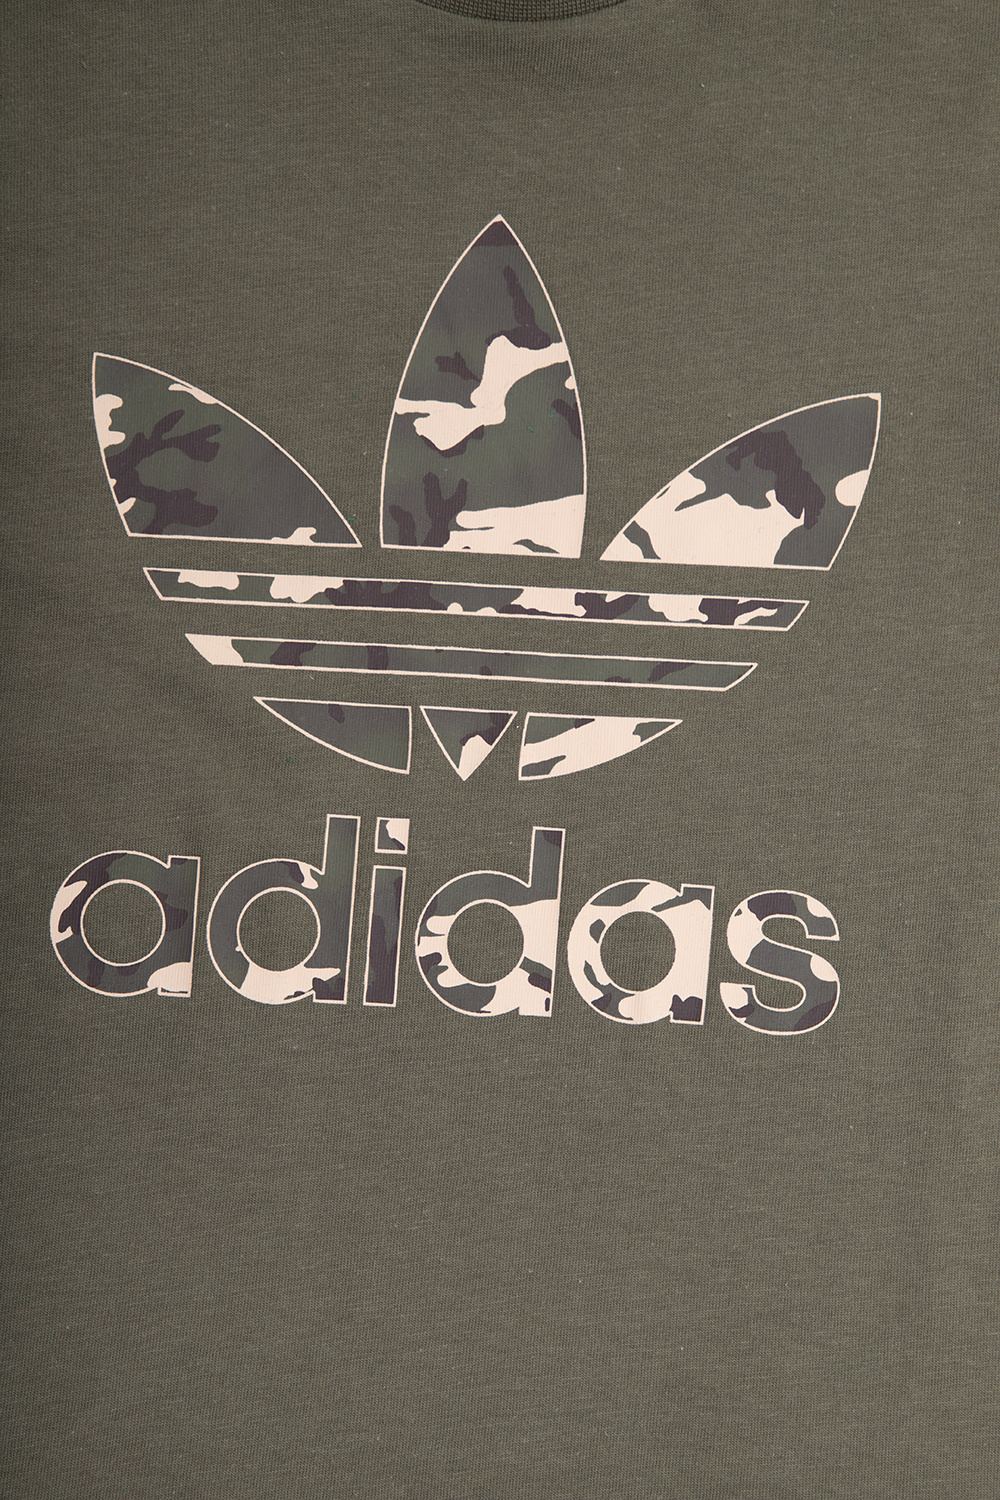 ADIDAS Kids adidas now launches the